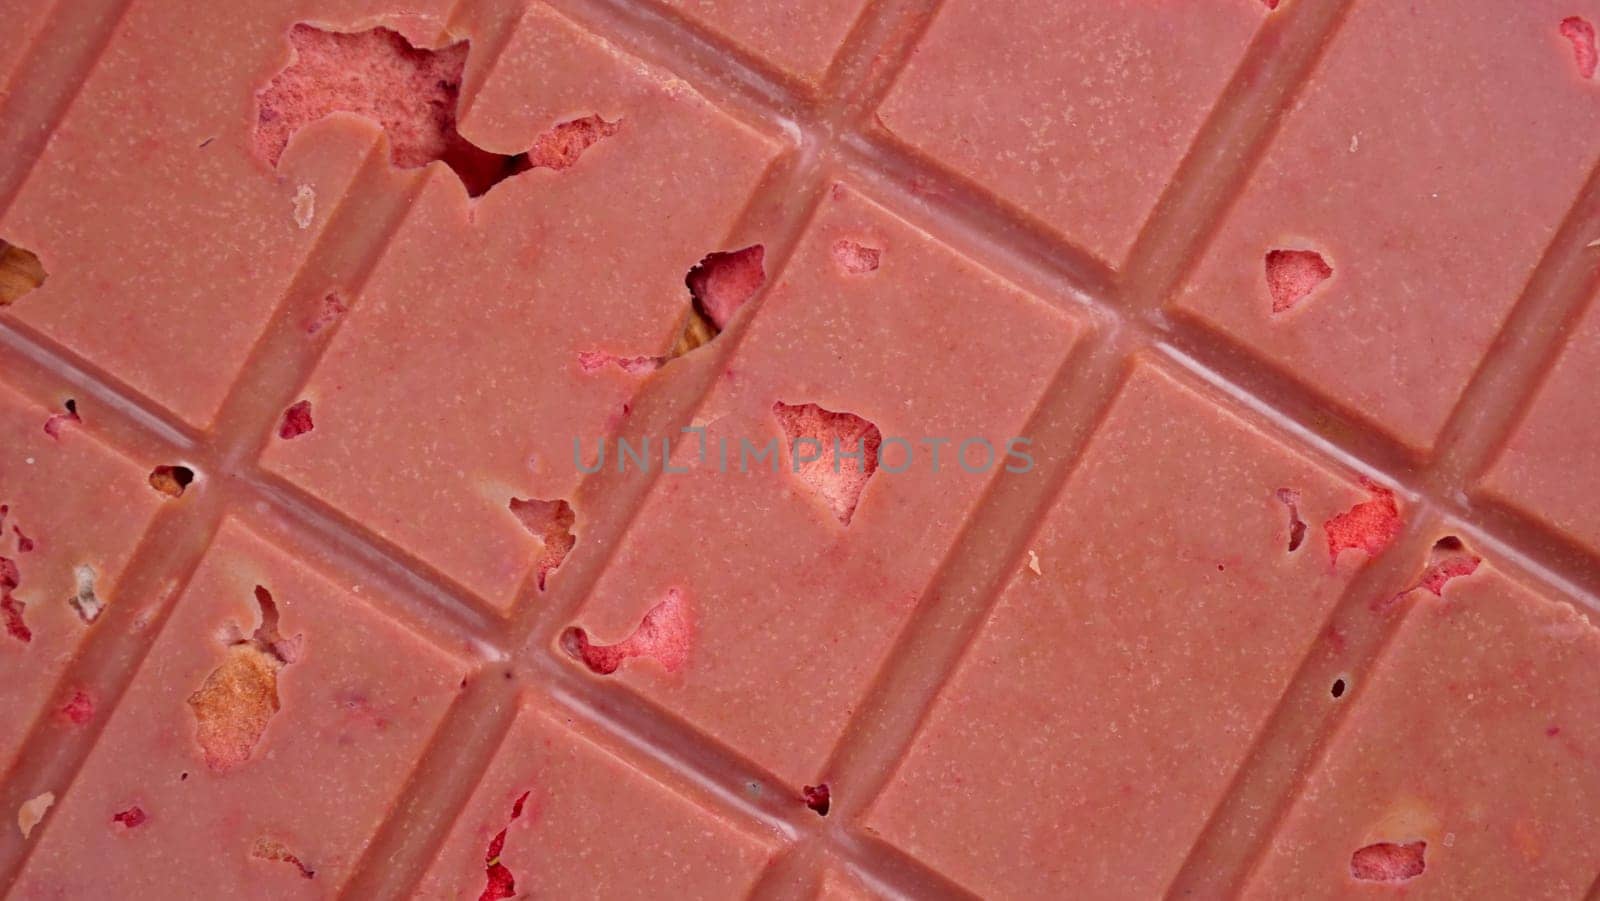 A bar of pink ruby chocolate with freeze-dried strawberries and almonds close-up. A healthy dessert based on berries and nuts